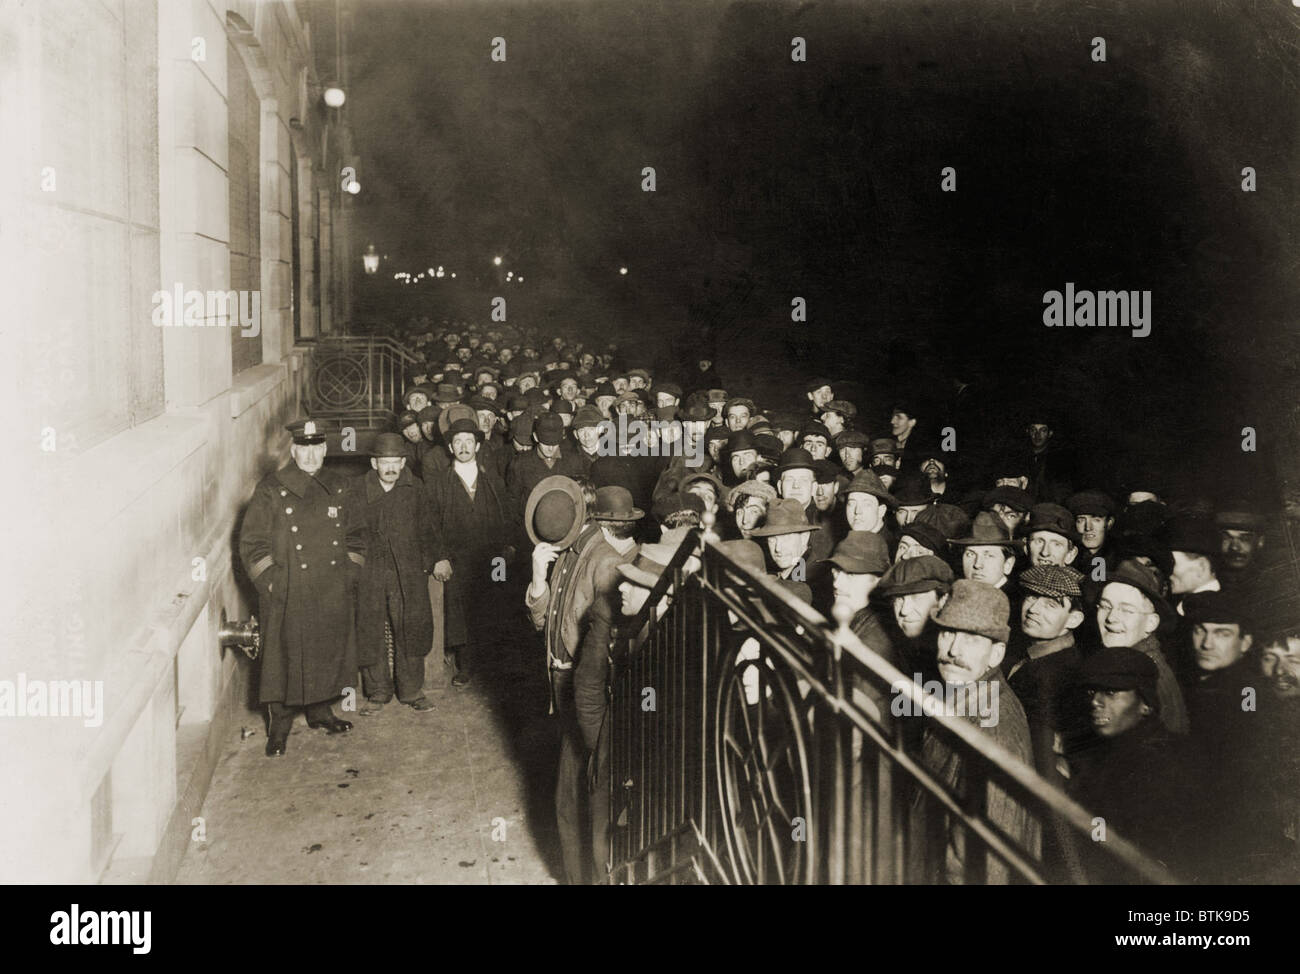 Crowd of men outside the Municipal Lodging House, waiting for the doors to open in January 1914. The 1910 census listed residents who had lost their jobs as porters, laborers, bakers and a lithographer. Most were native-born males 30 to 60 years old. Stock Photo